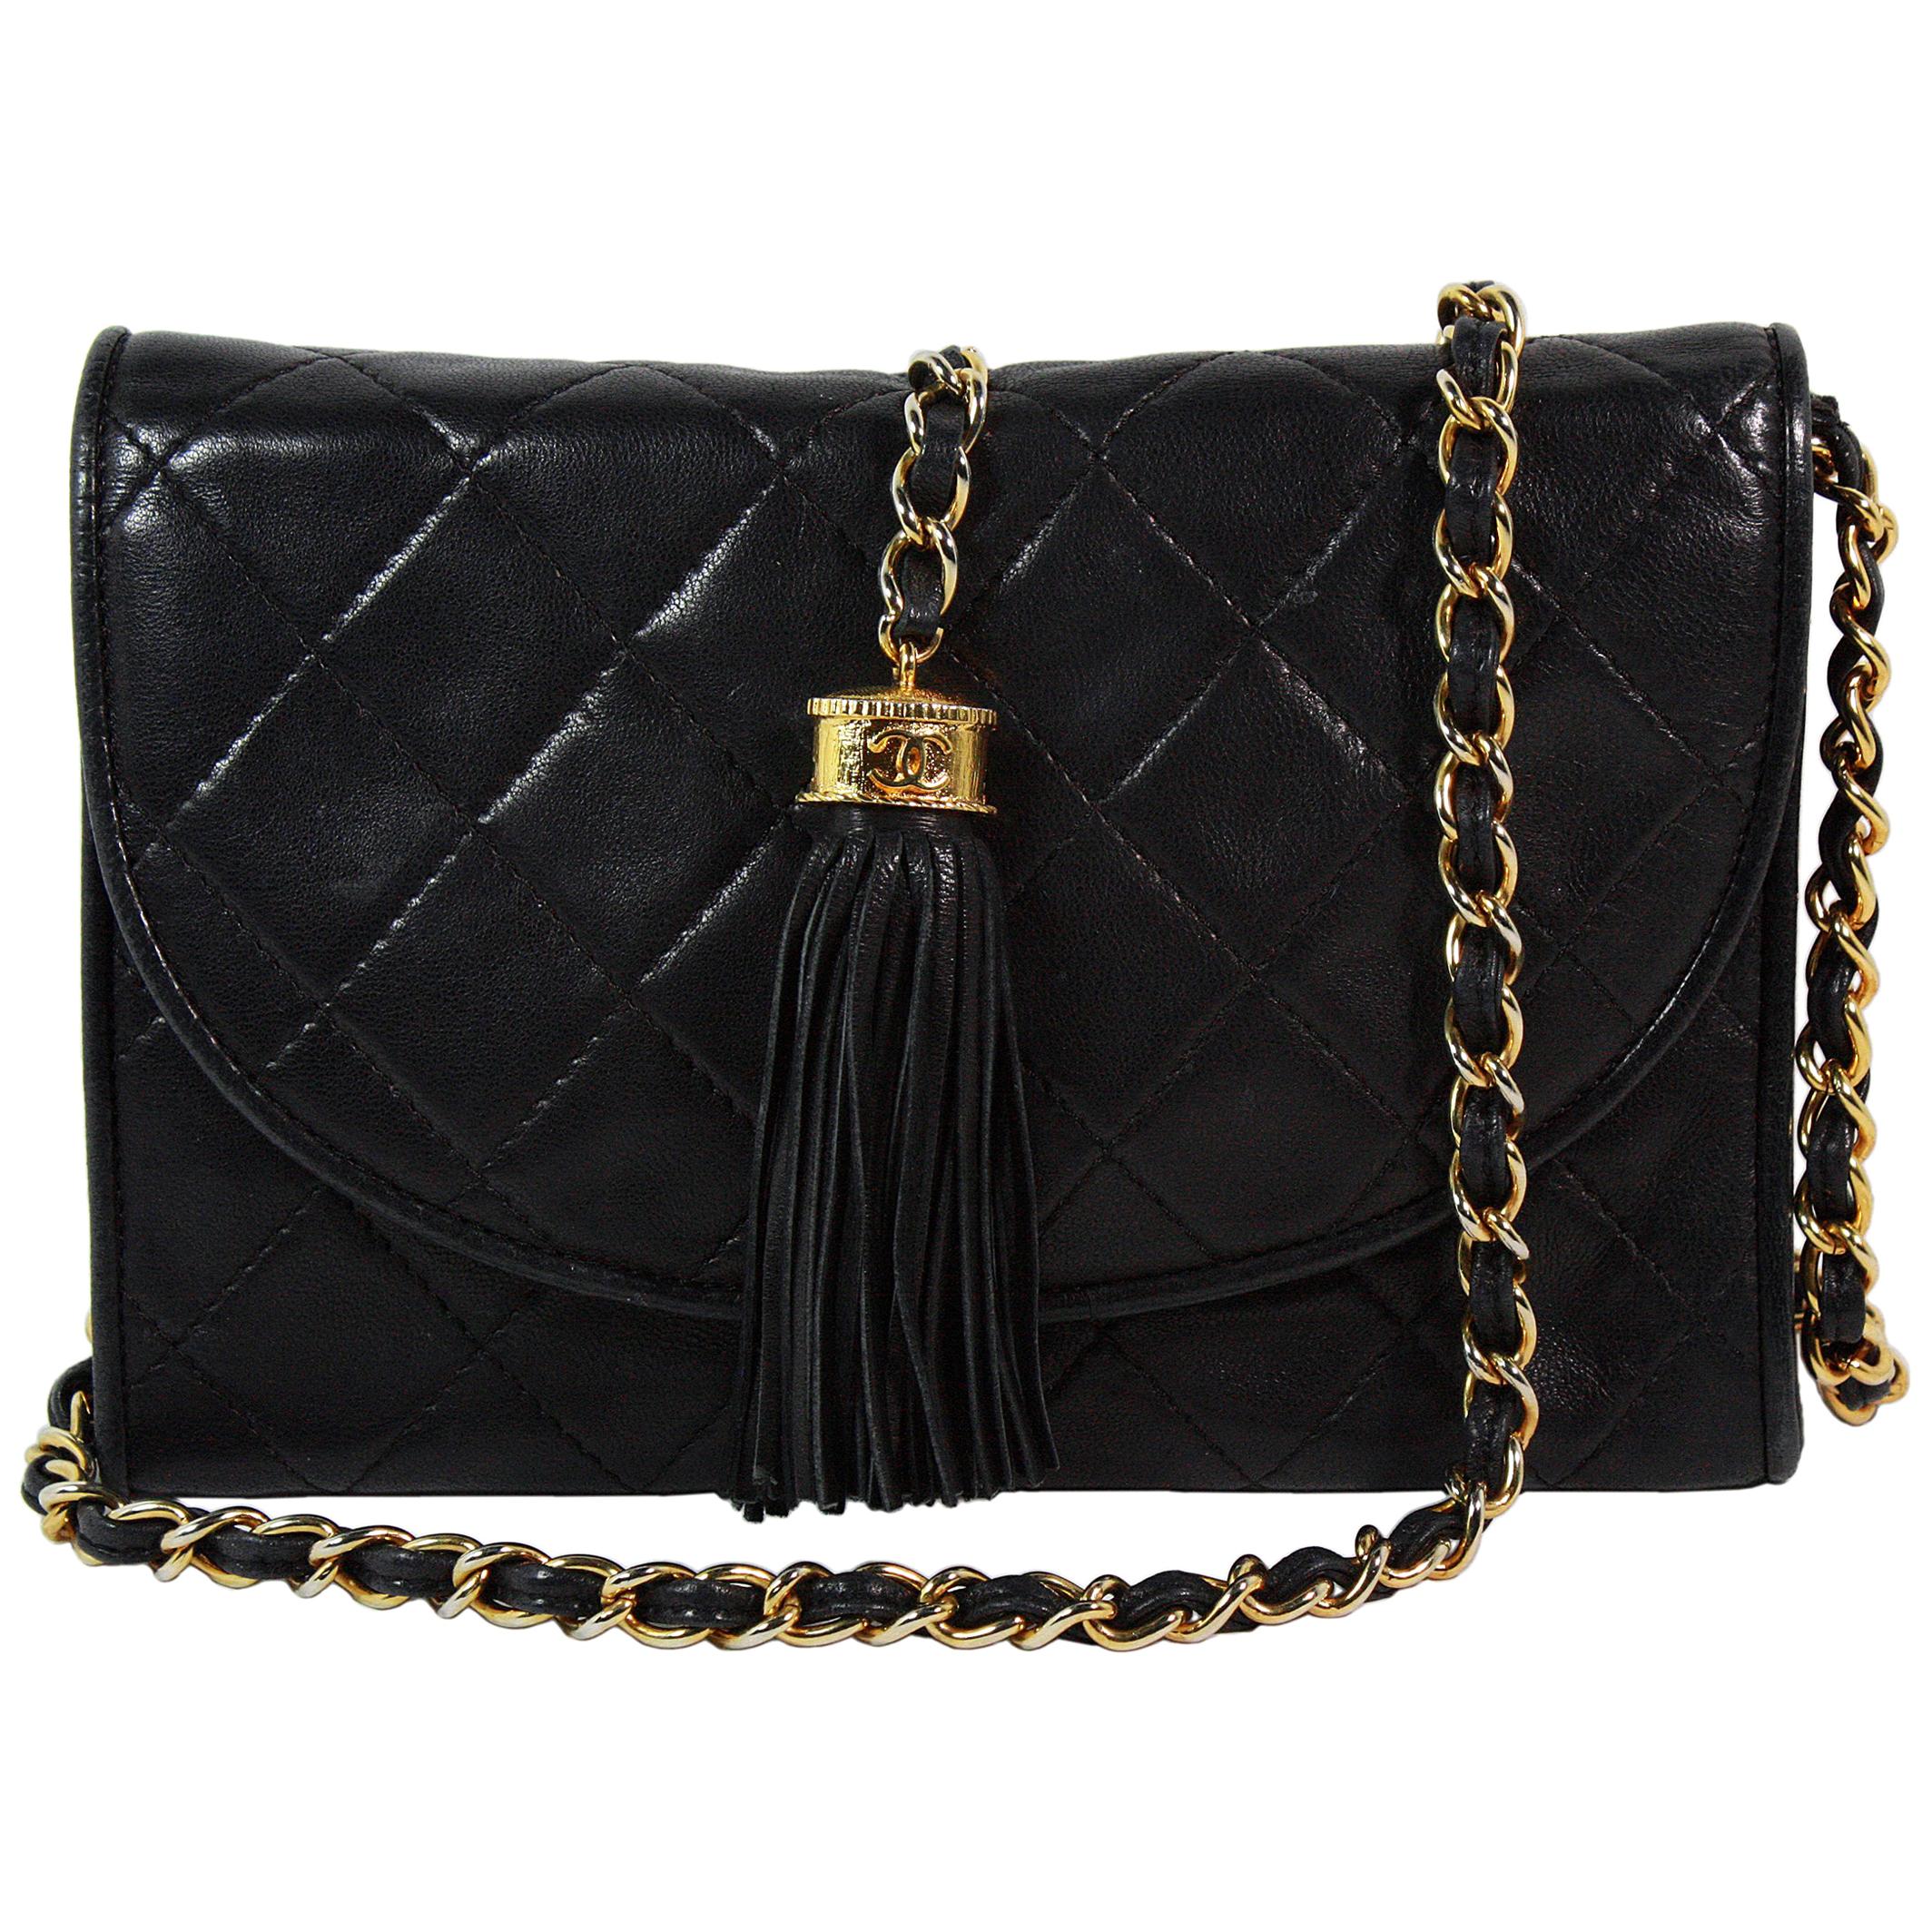 Chanel Black Leather Quilted Crossbody Bag with Tassle